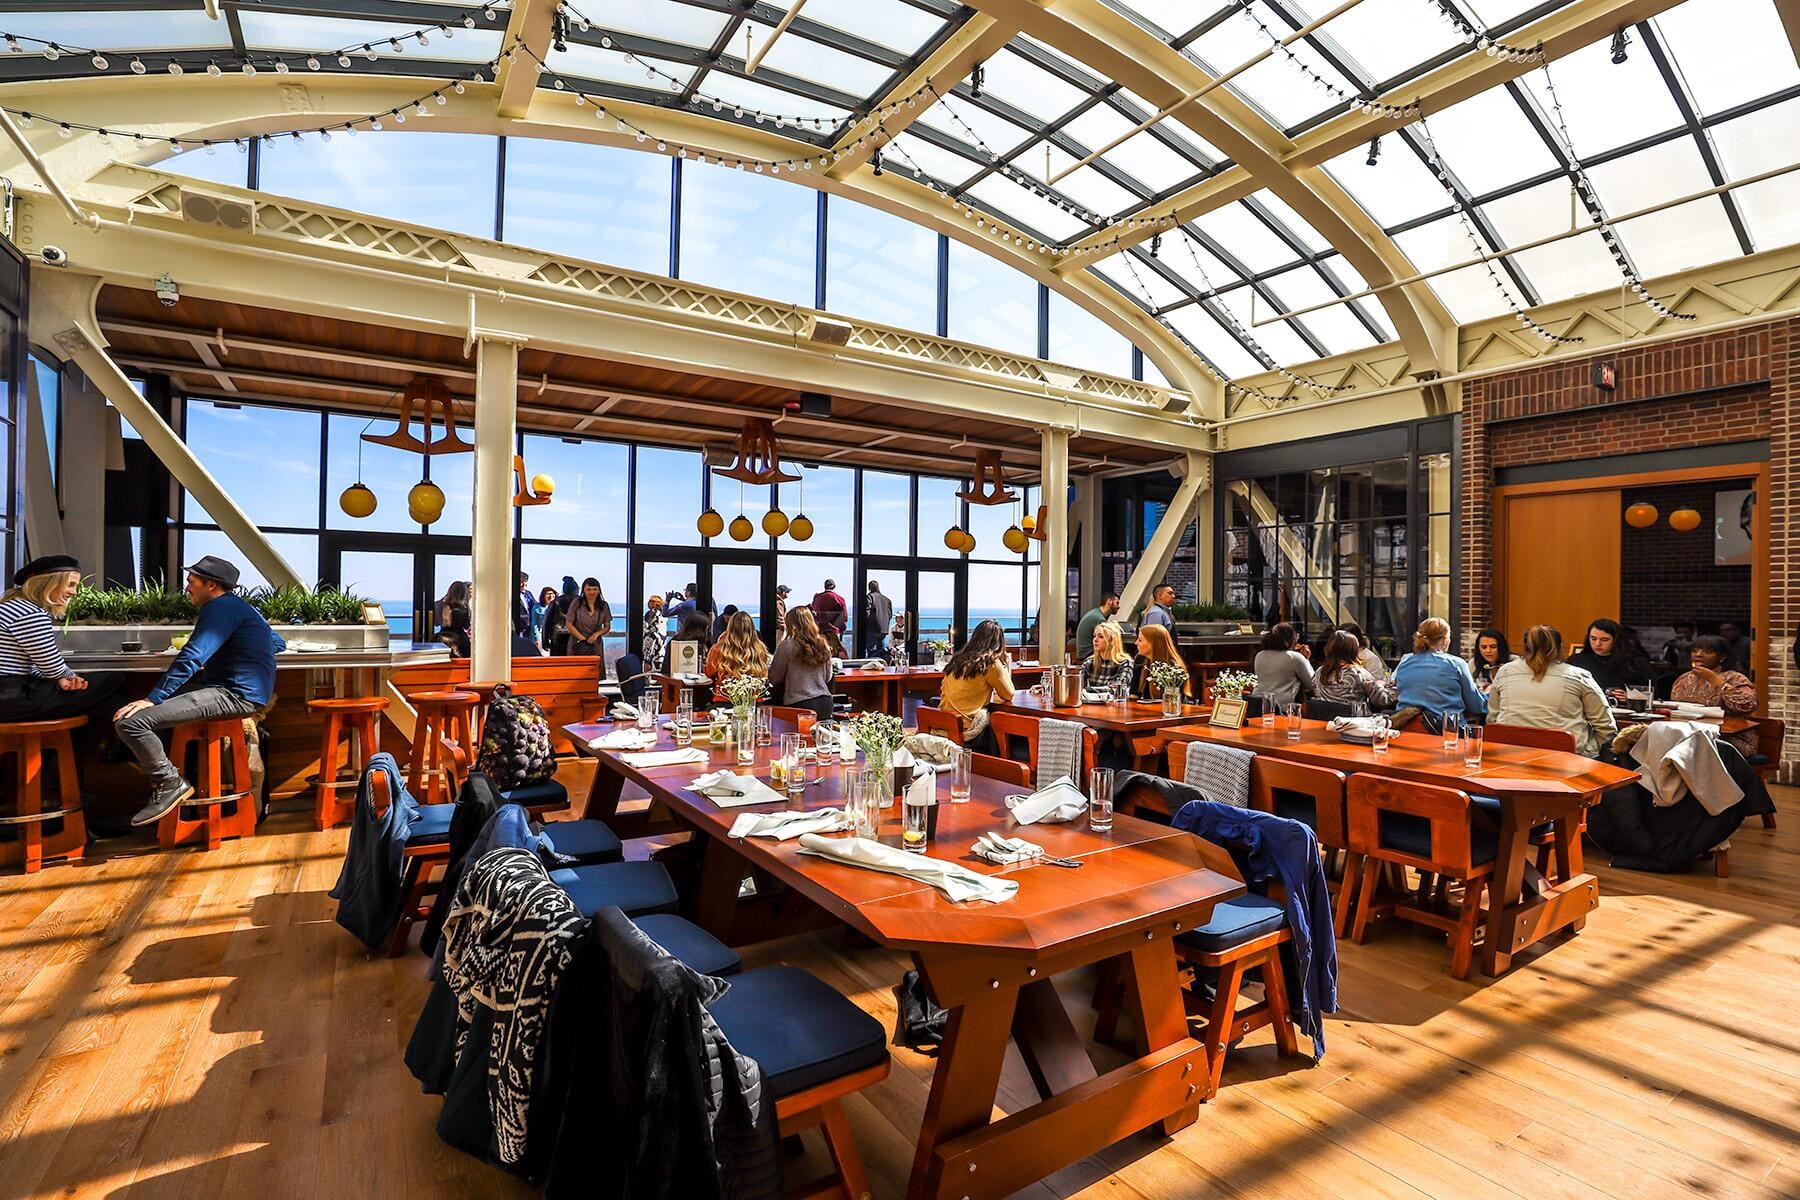 <a href='https://www.fodors.com/world/north-america/usa/illinois/chicago/experiences/news/photos/the-best-ways-to-enjoy-chicagos-lake-michigan-lakefront#'>From &quot;Here's How to Best Experience Chicago's Lakefront: Rooftop Bars, Lounges, and Restaurants&quot;</a>